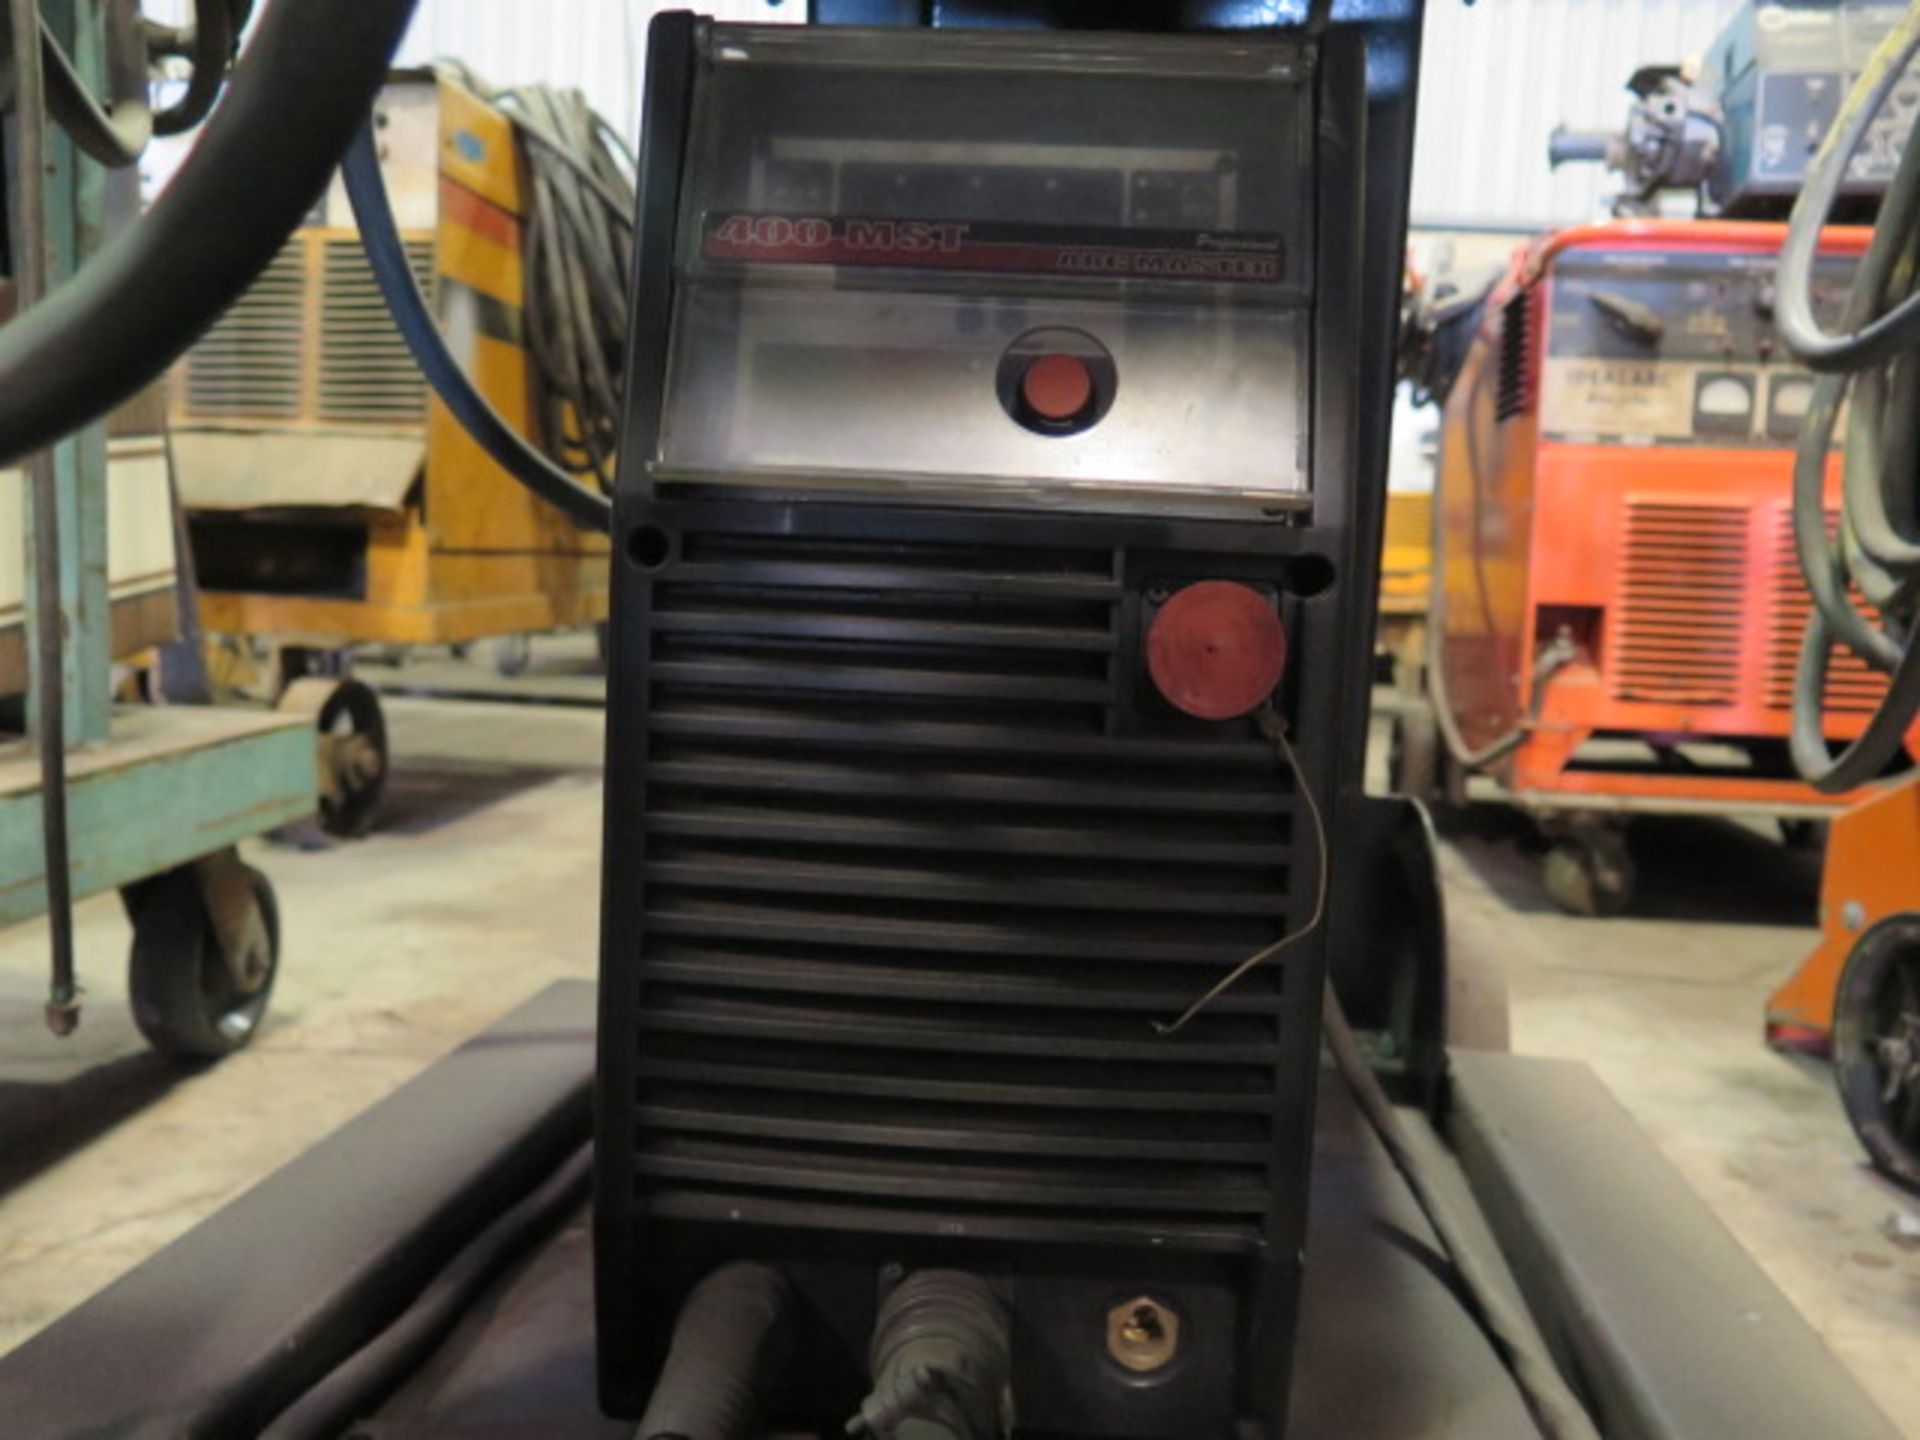 Thermal Arc 400MST Arc Welding Power Source w/ VA2000 Wire Feed (SOLD AS-IS - NO WARRANTY) - Image 3 of 8